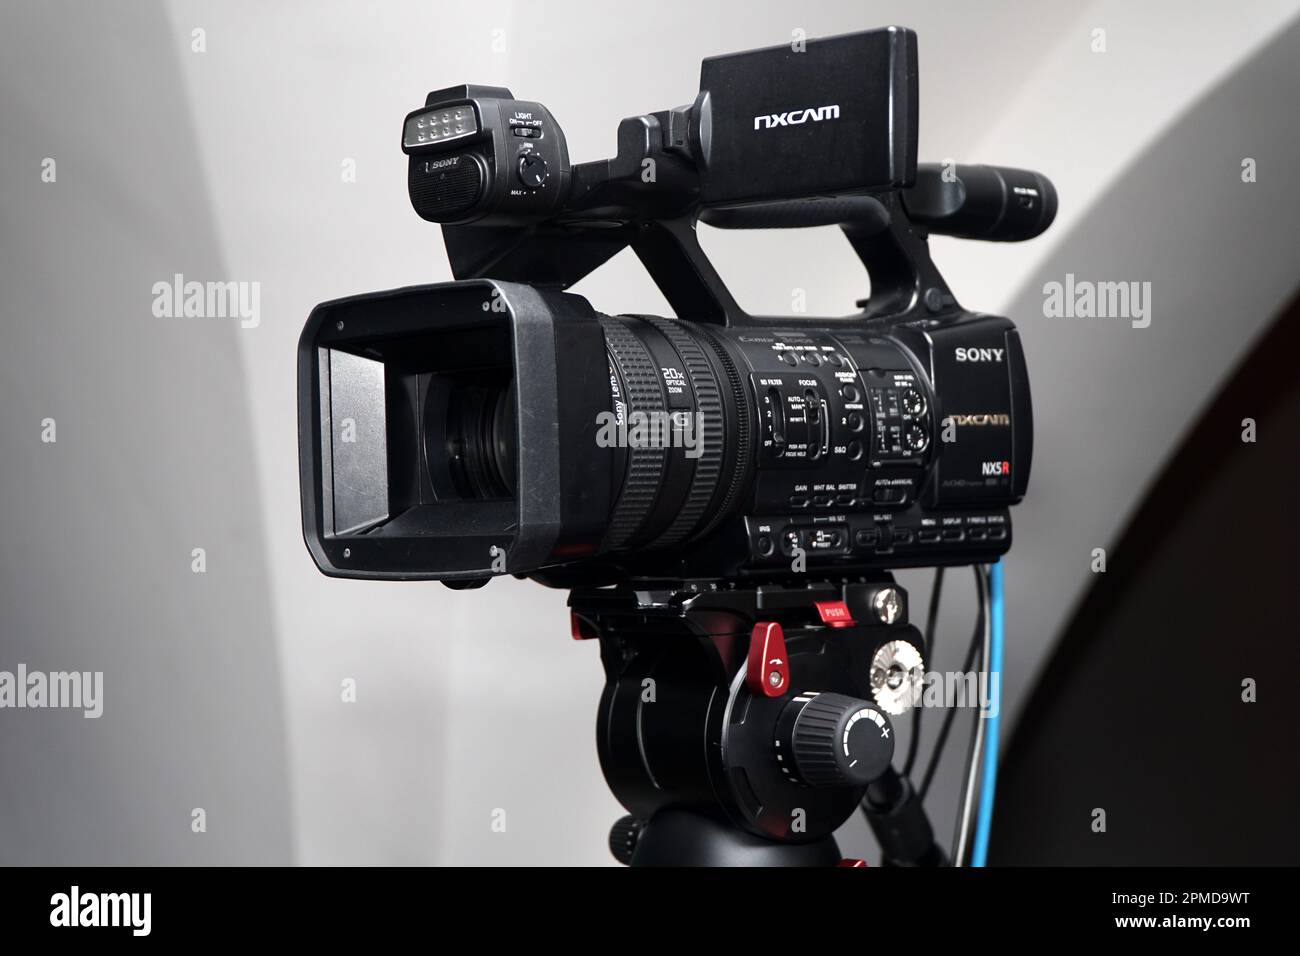 Professional video Camcorder camera Sony NXCAM HXR-NX5R on a tripod for broadcasting, recording for streaming corporate live event Stock Photo